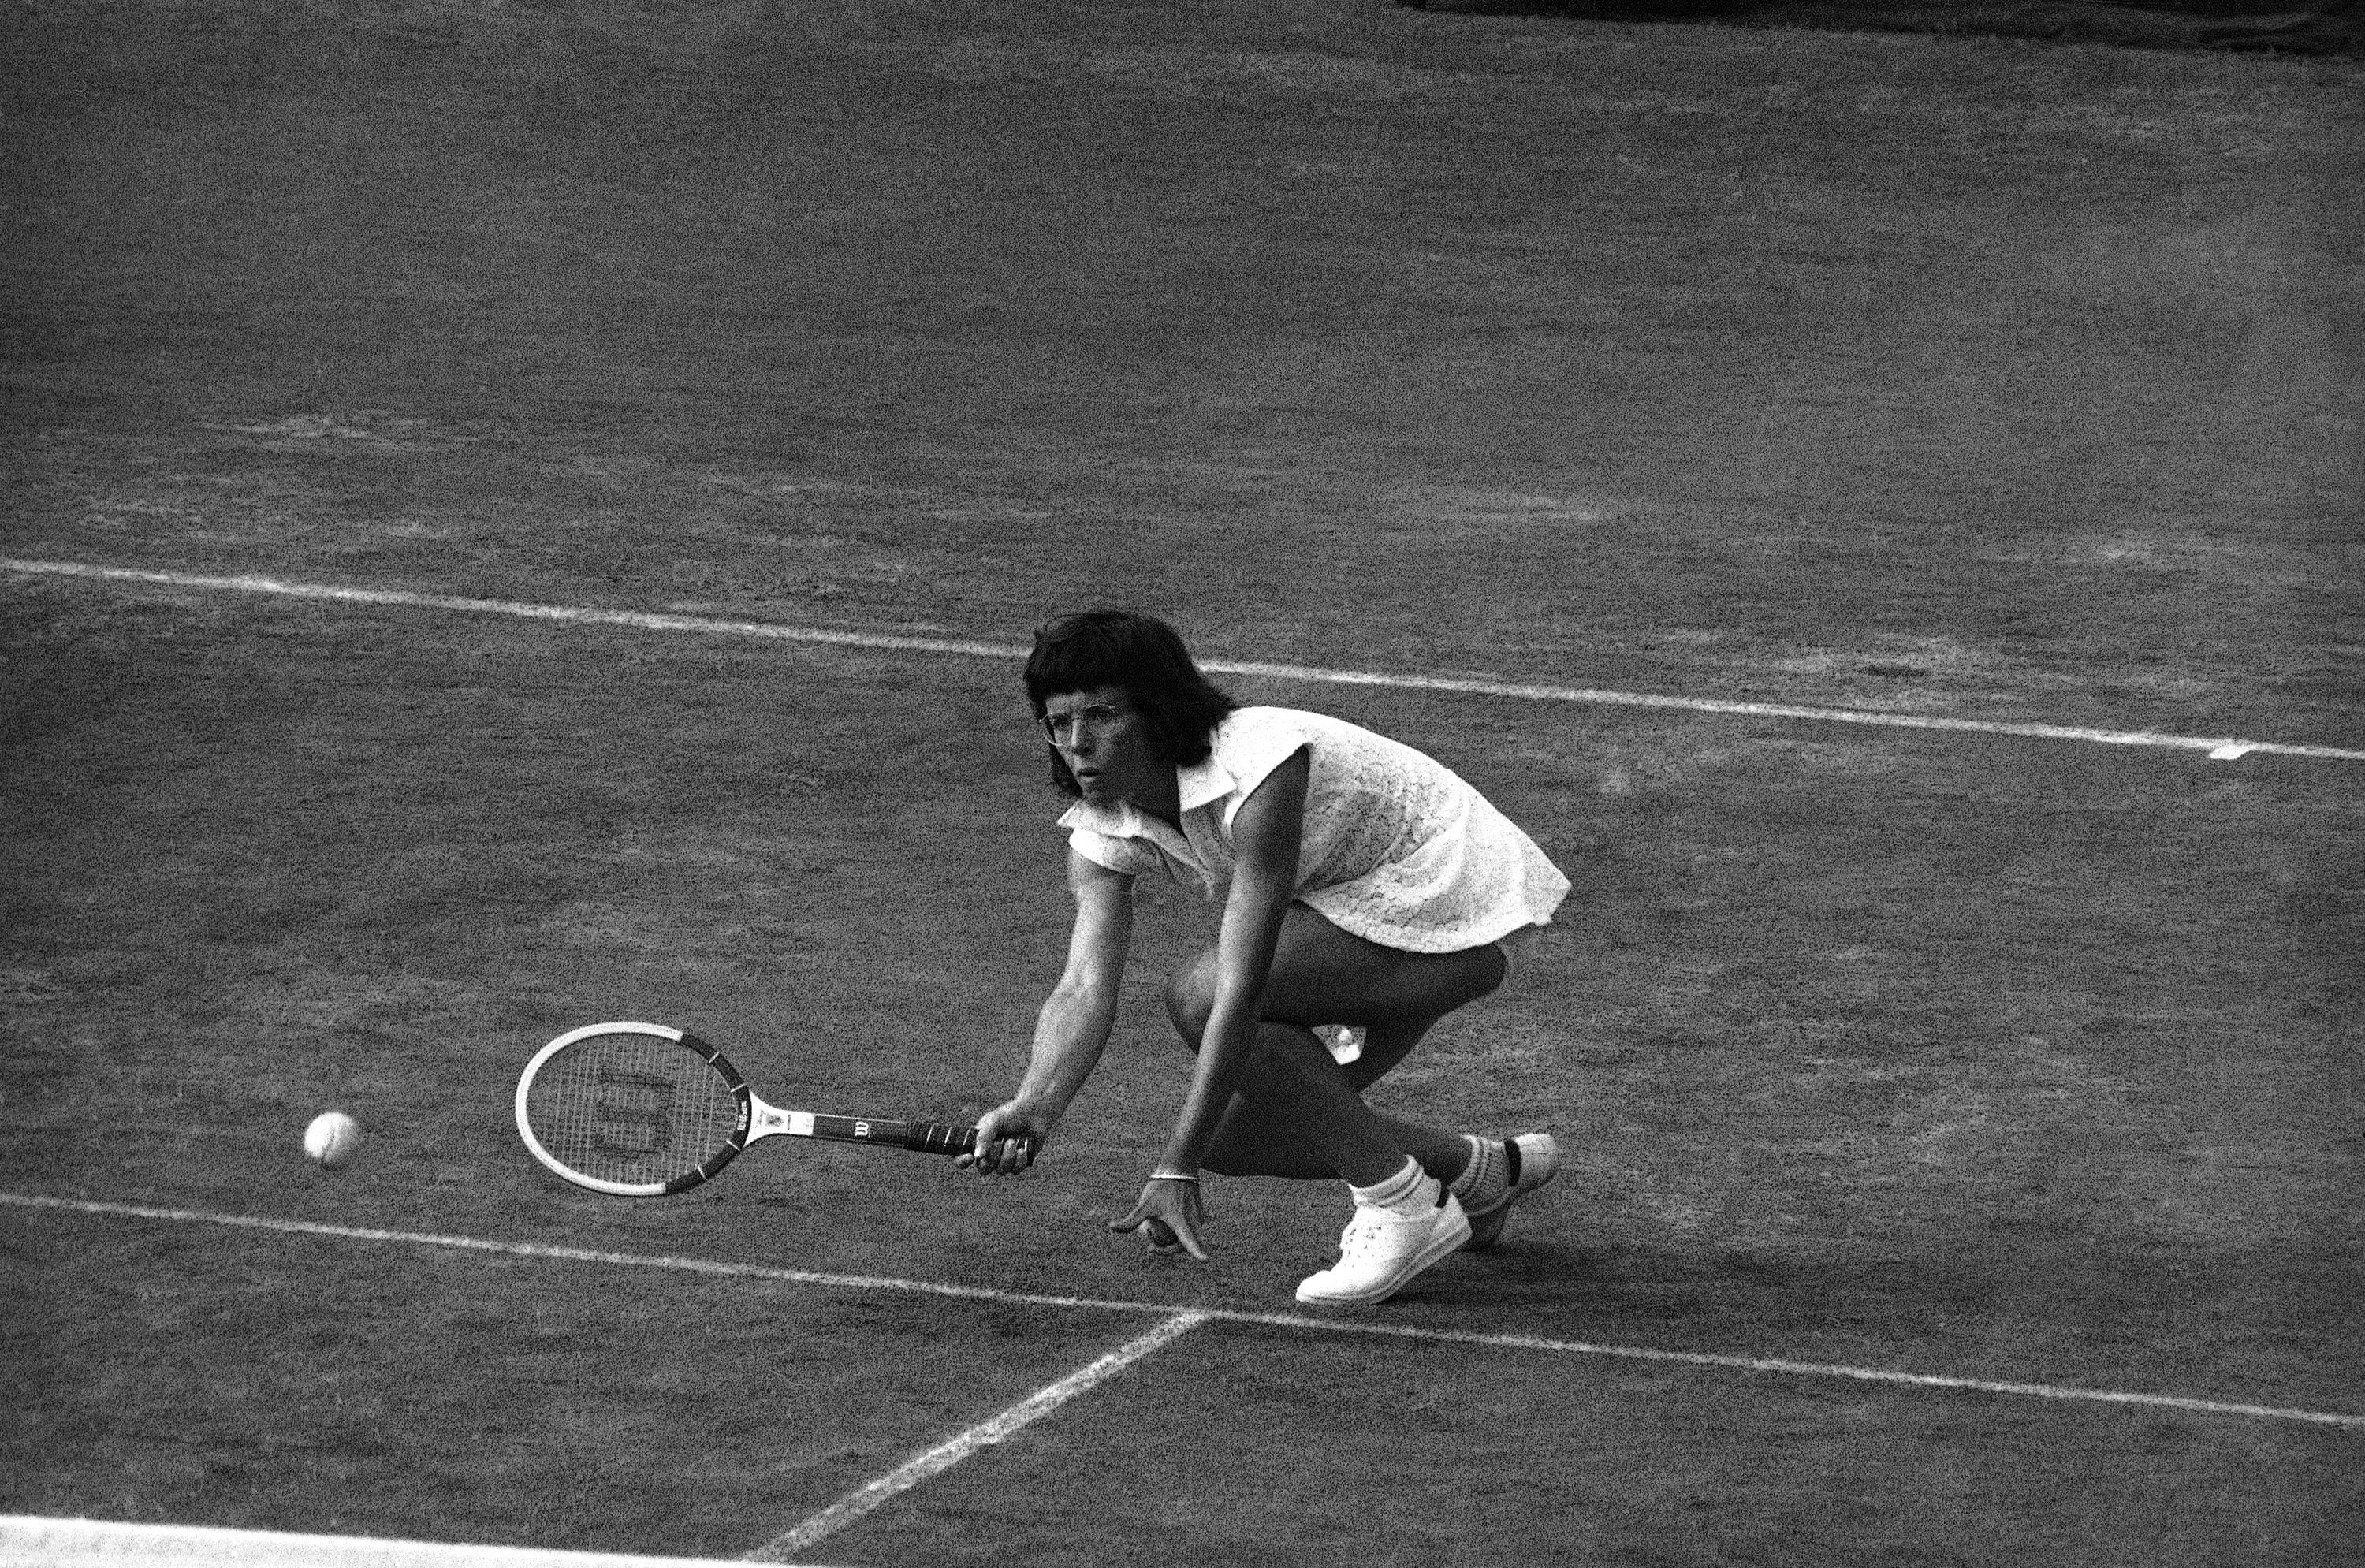 Billie Jean King during the U.S. Open tennis championship in 1971.